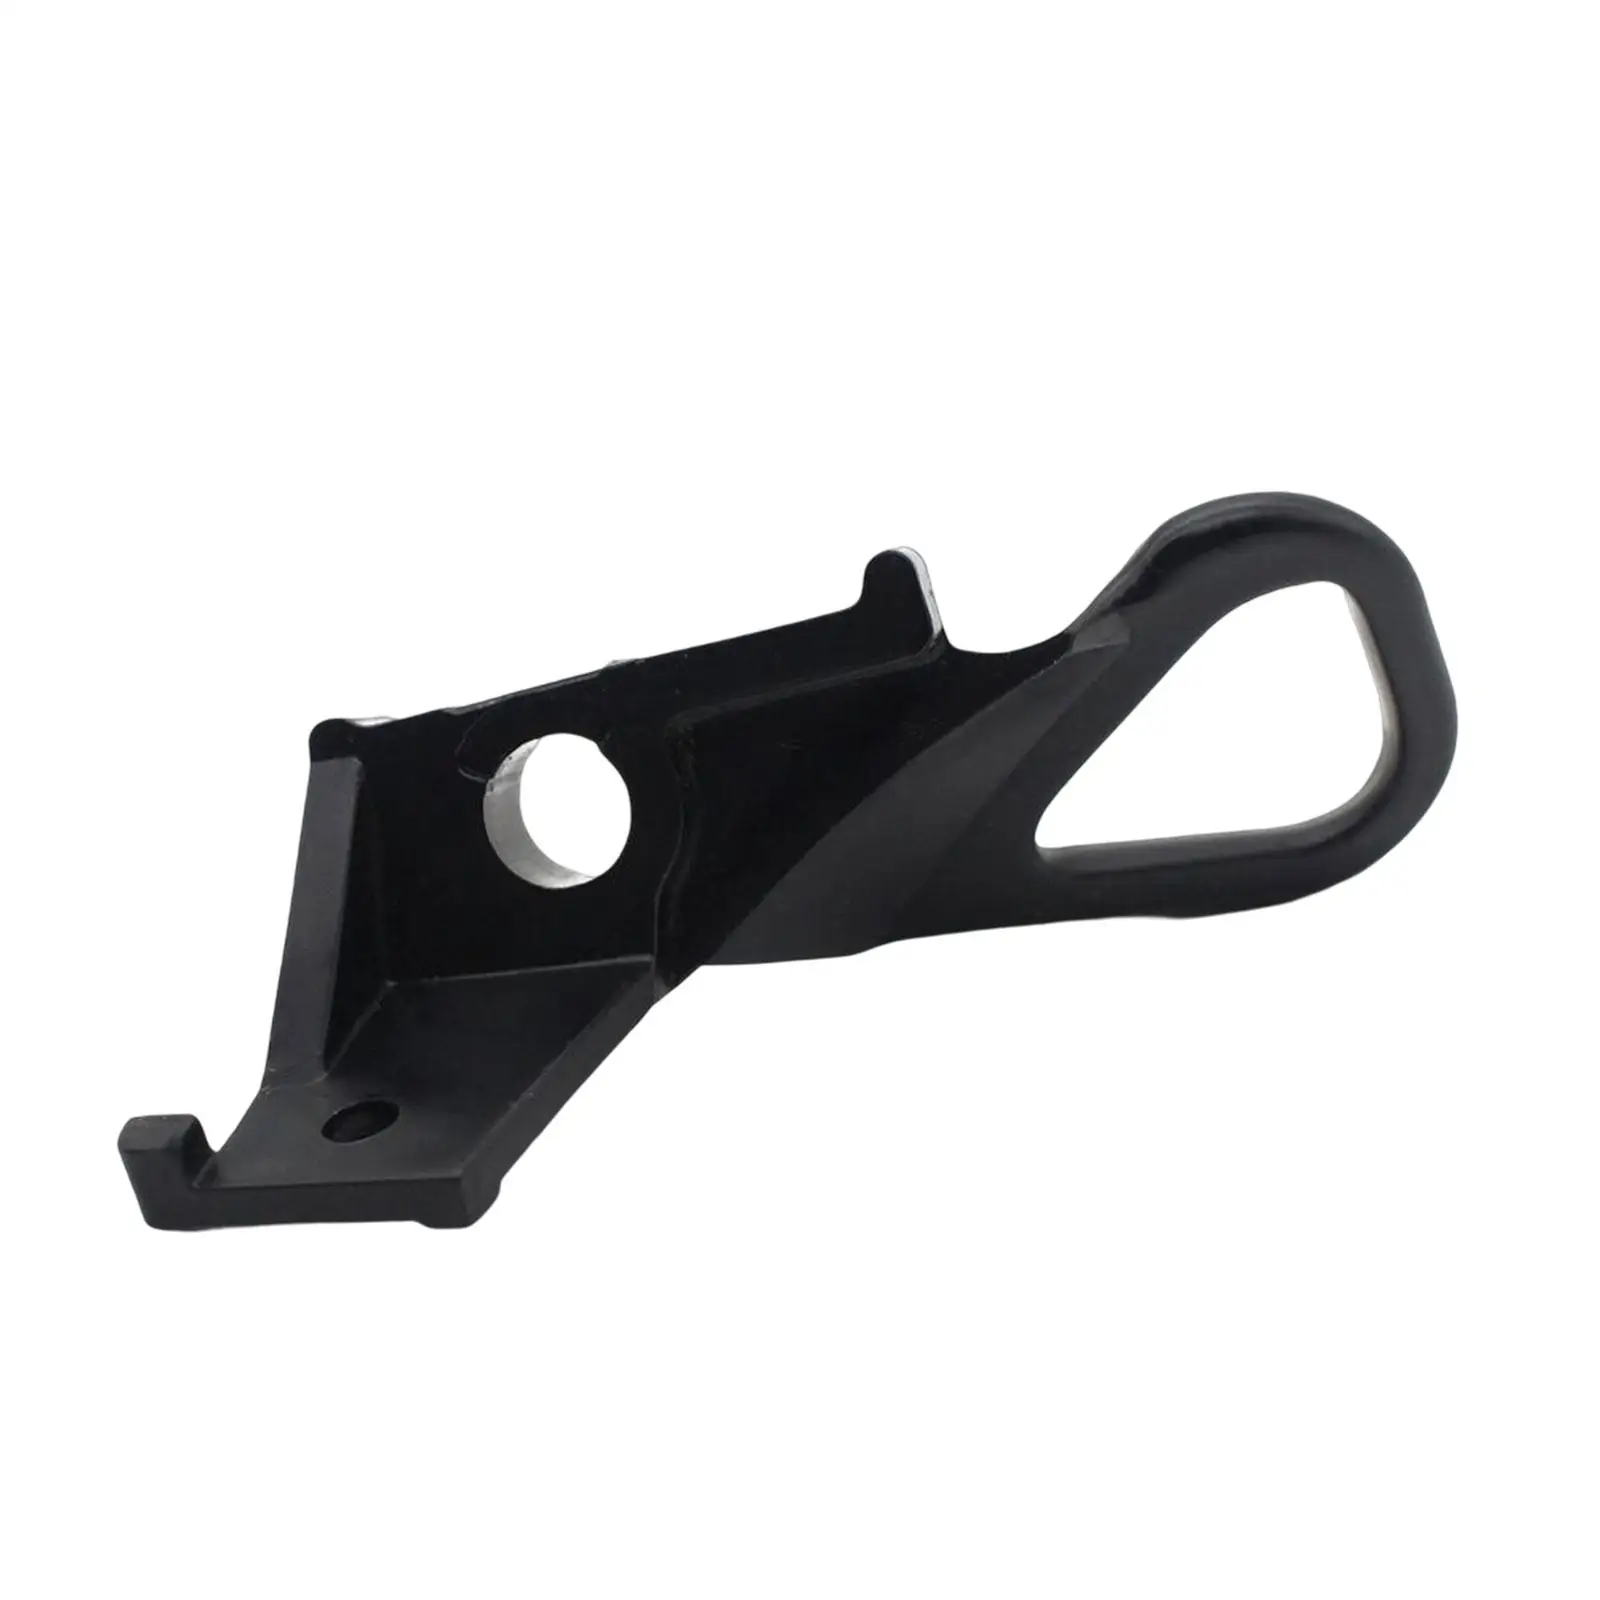 Oil Cup Fixed Bracket Cover Aluminum Alloy Oil Cup Bracket Assembly Easy to